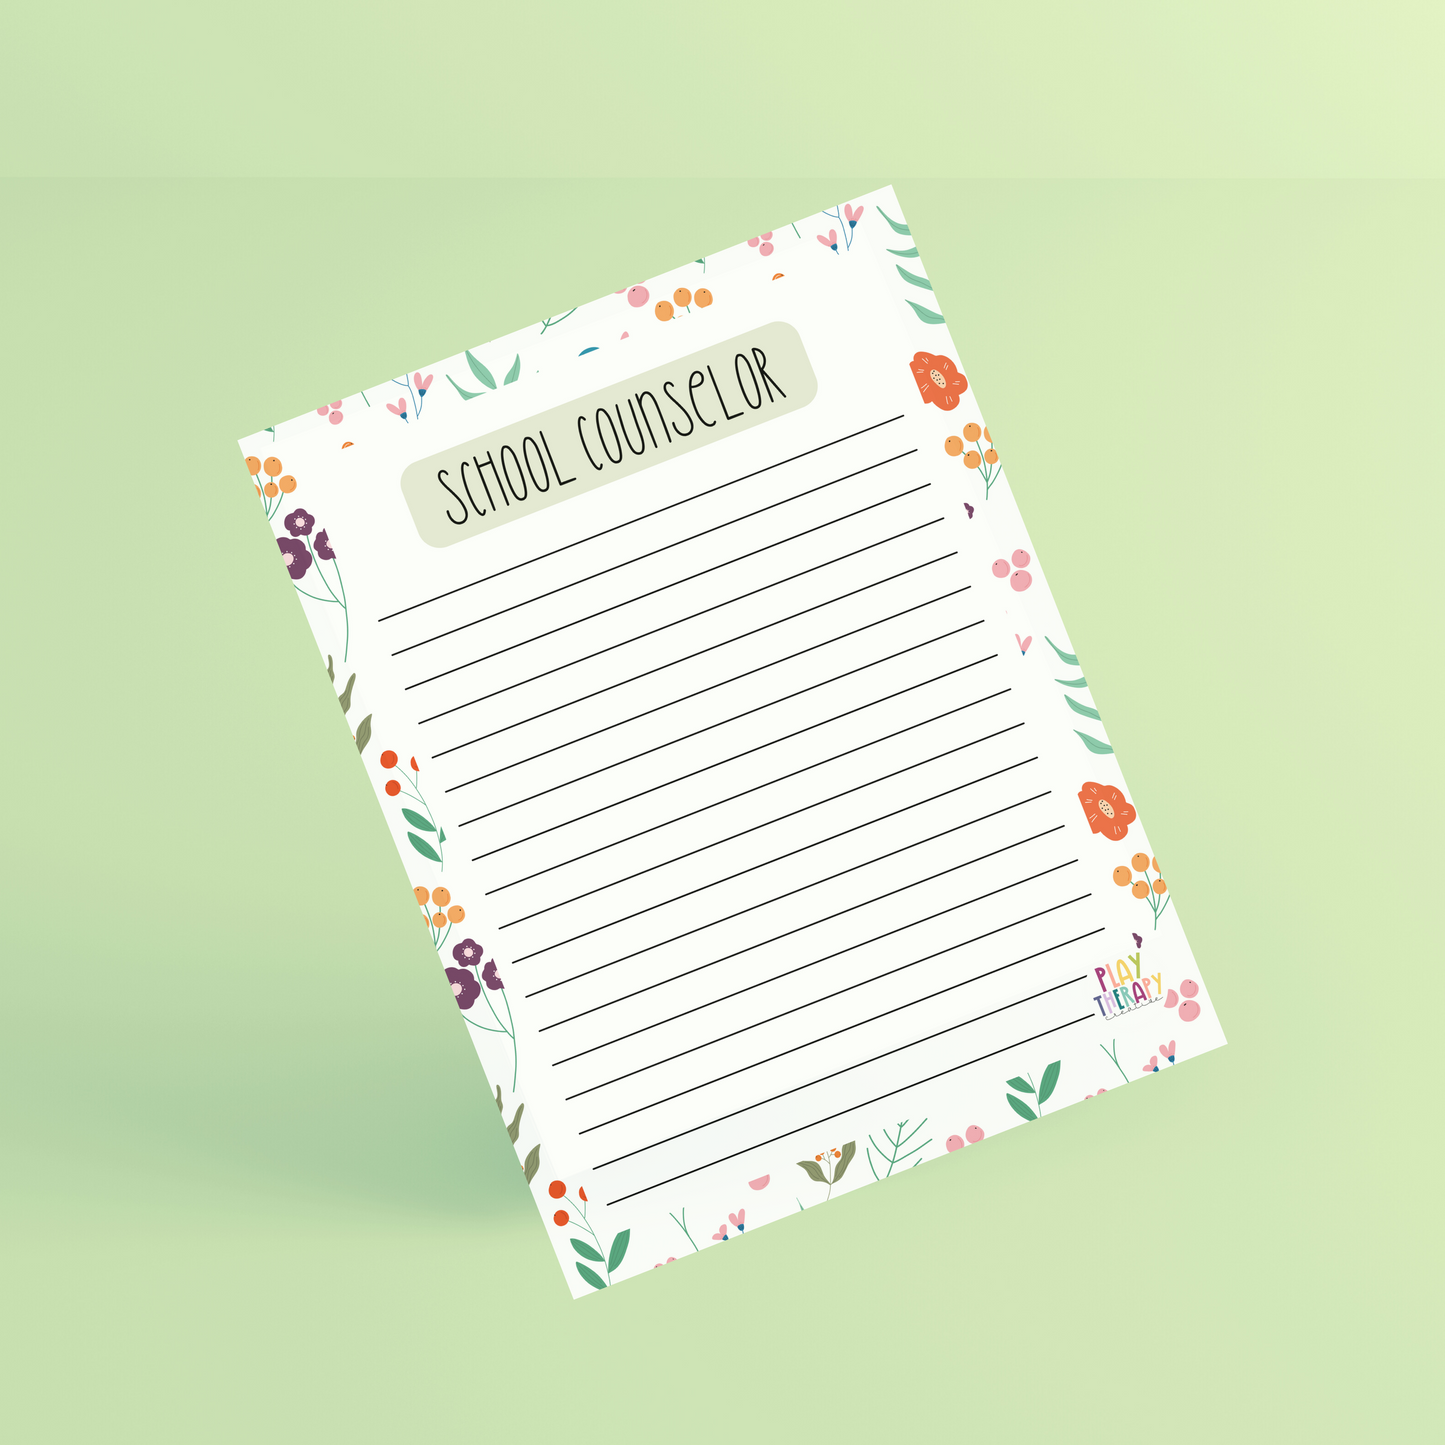 Floral School Counselor Notepad